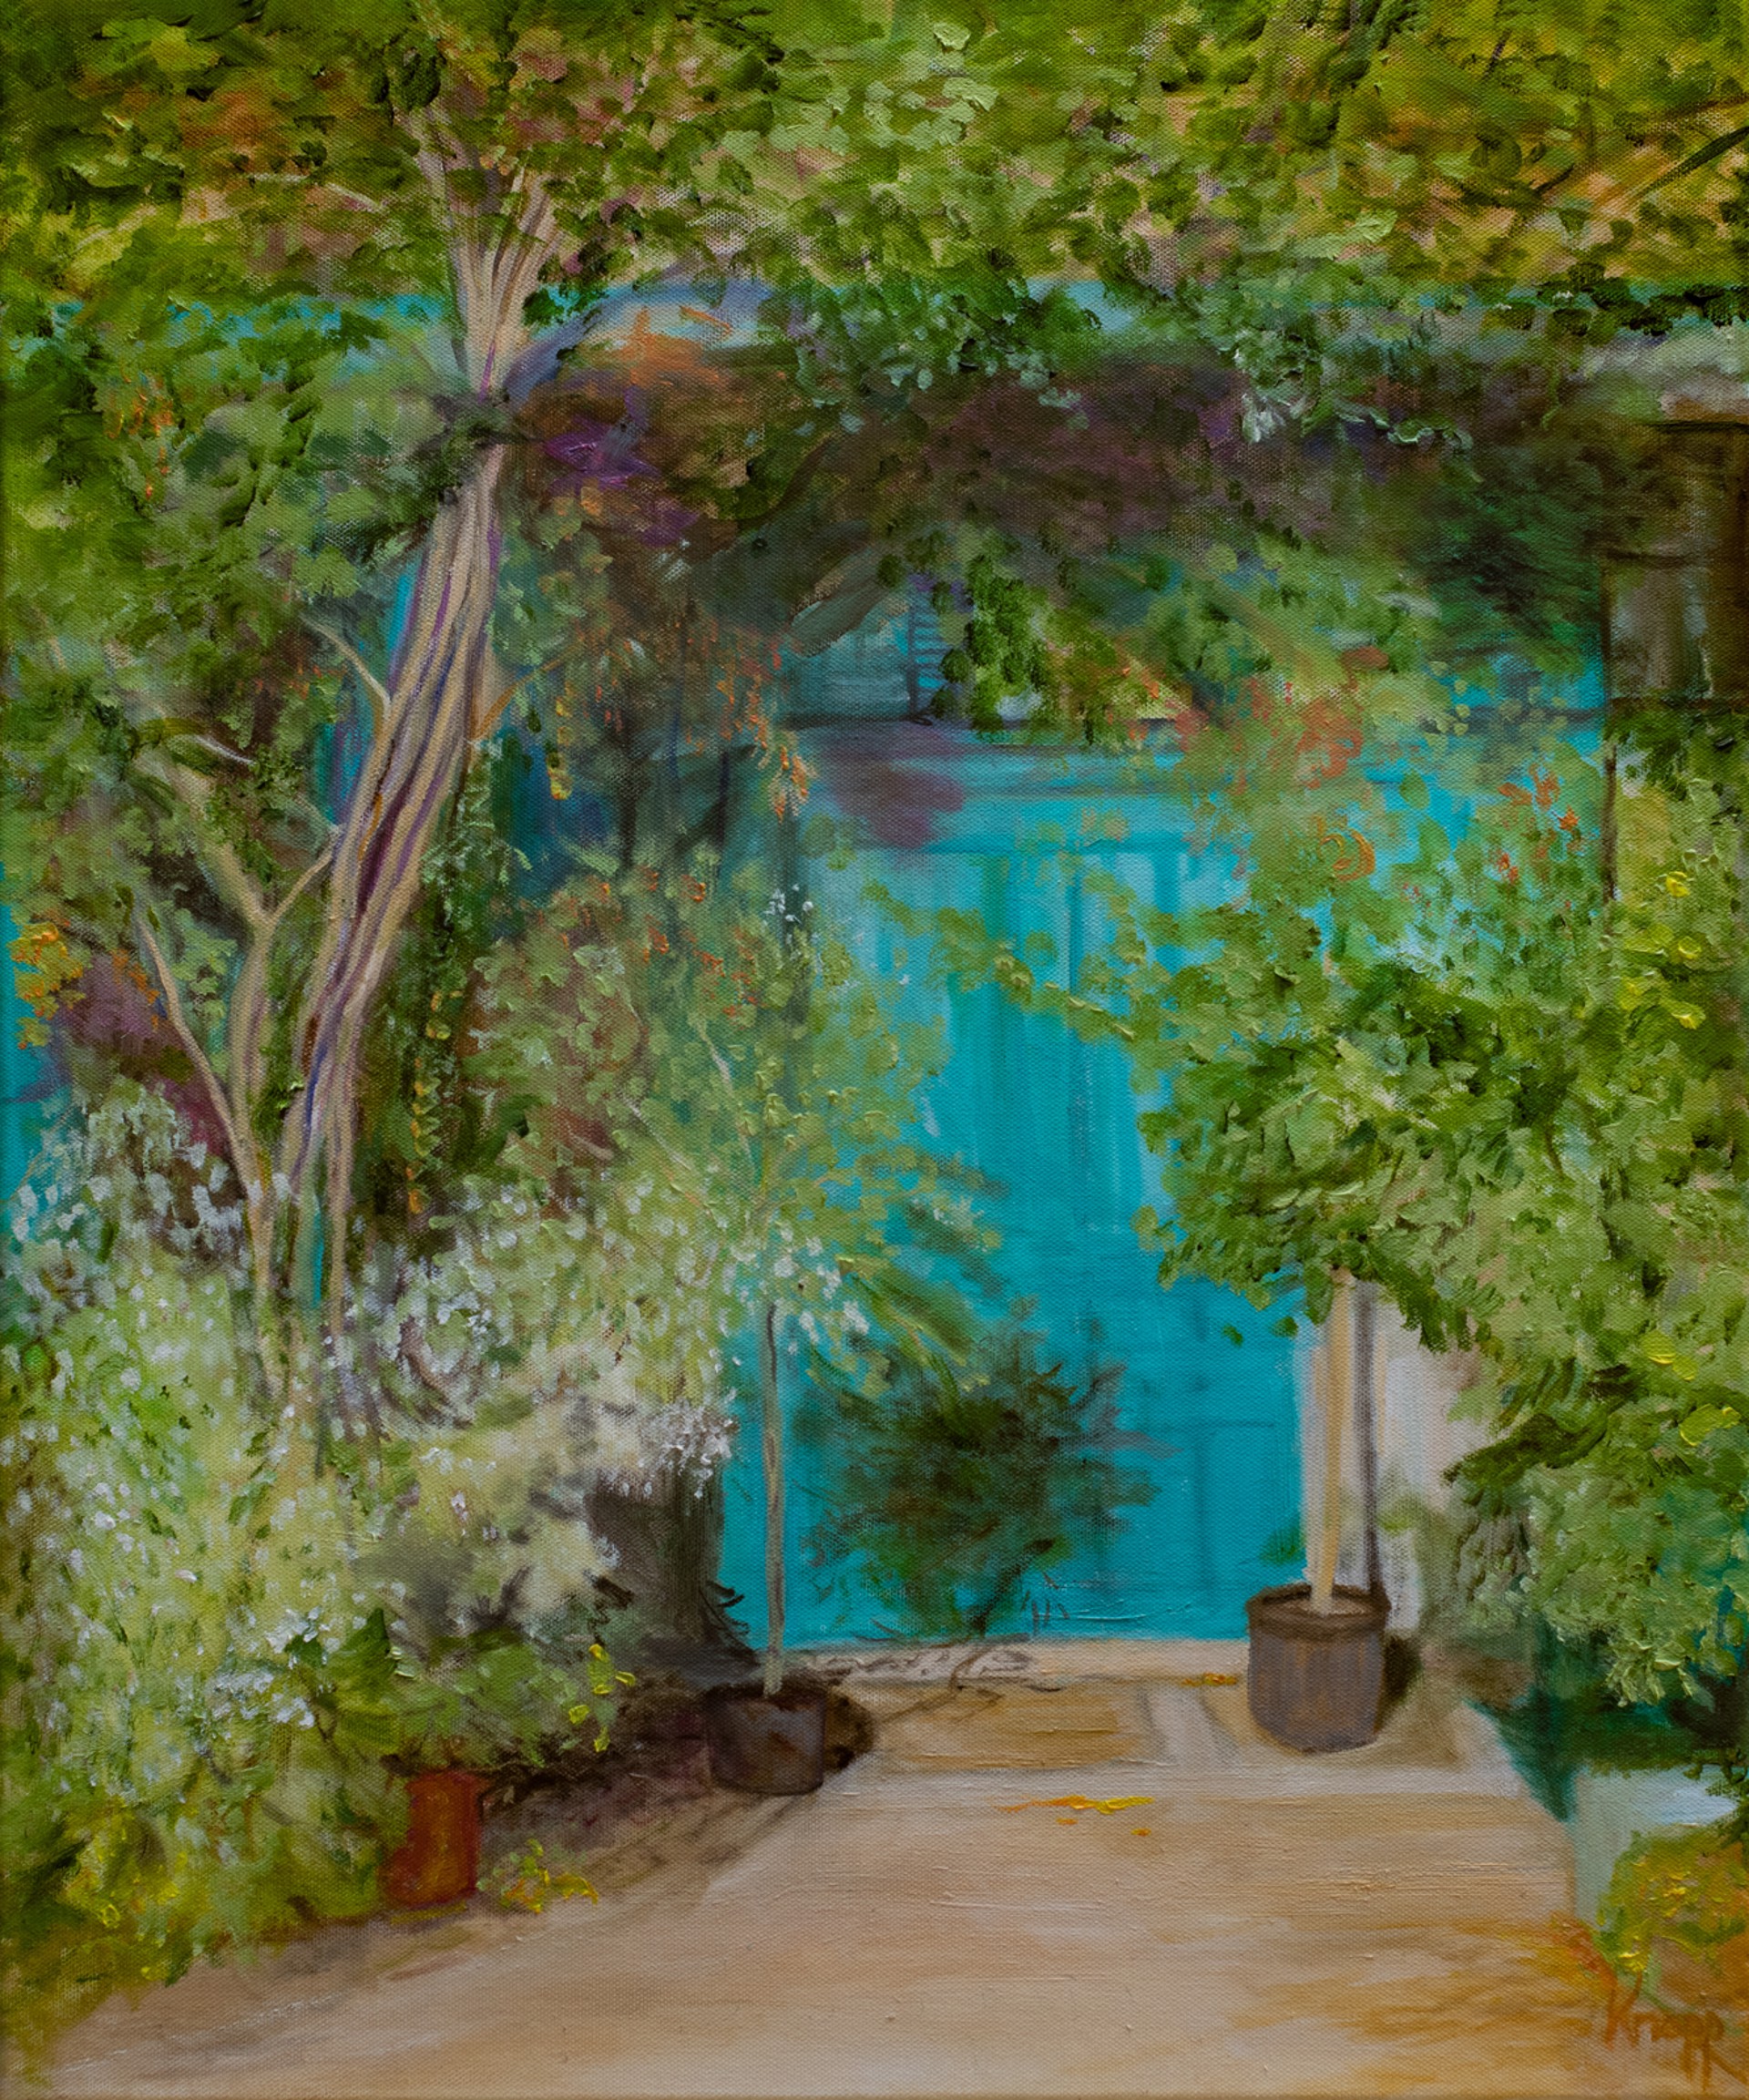 Monet's Home by Kathy Knopp